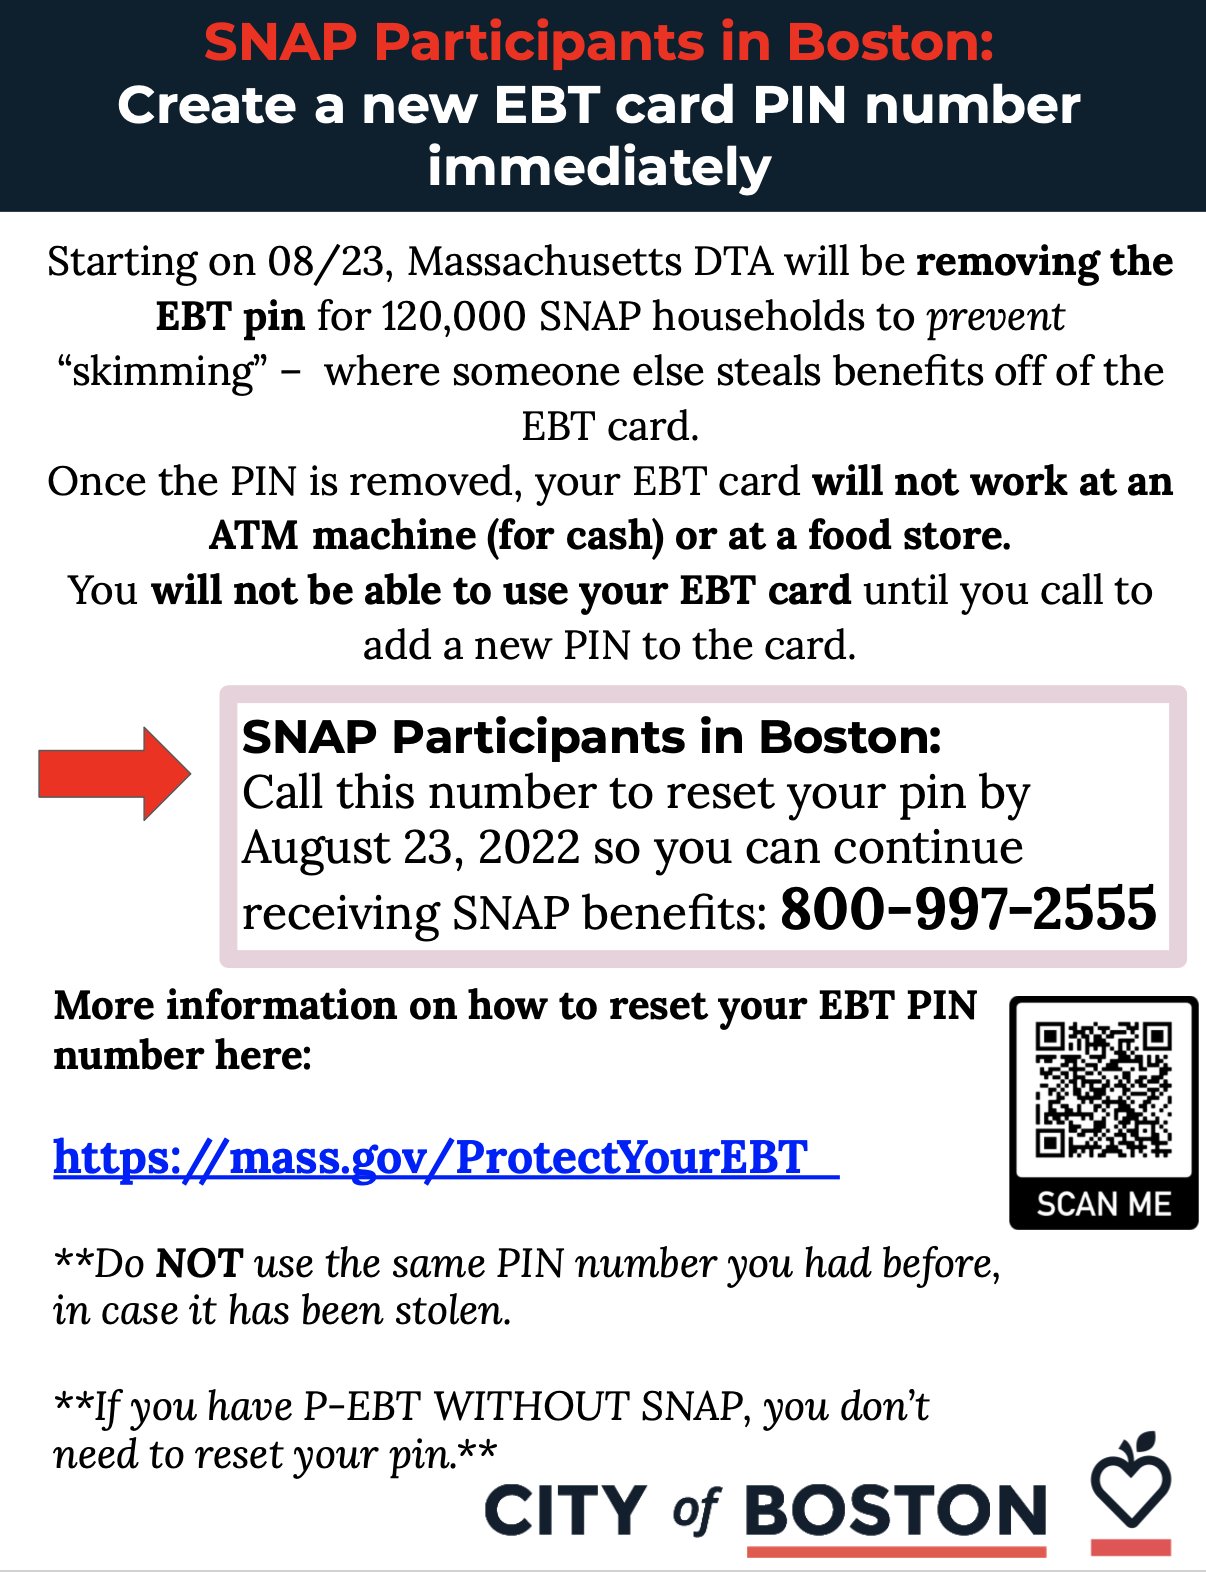 Creating a Personal Identification Number (PIN) for a P-EBT Food